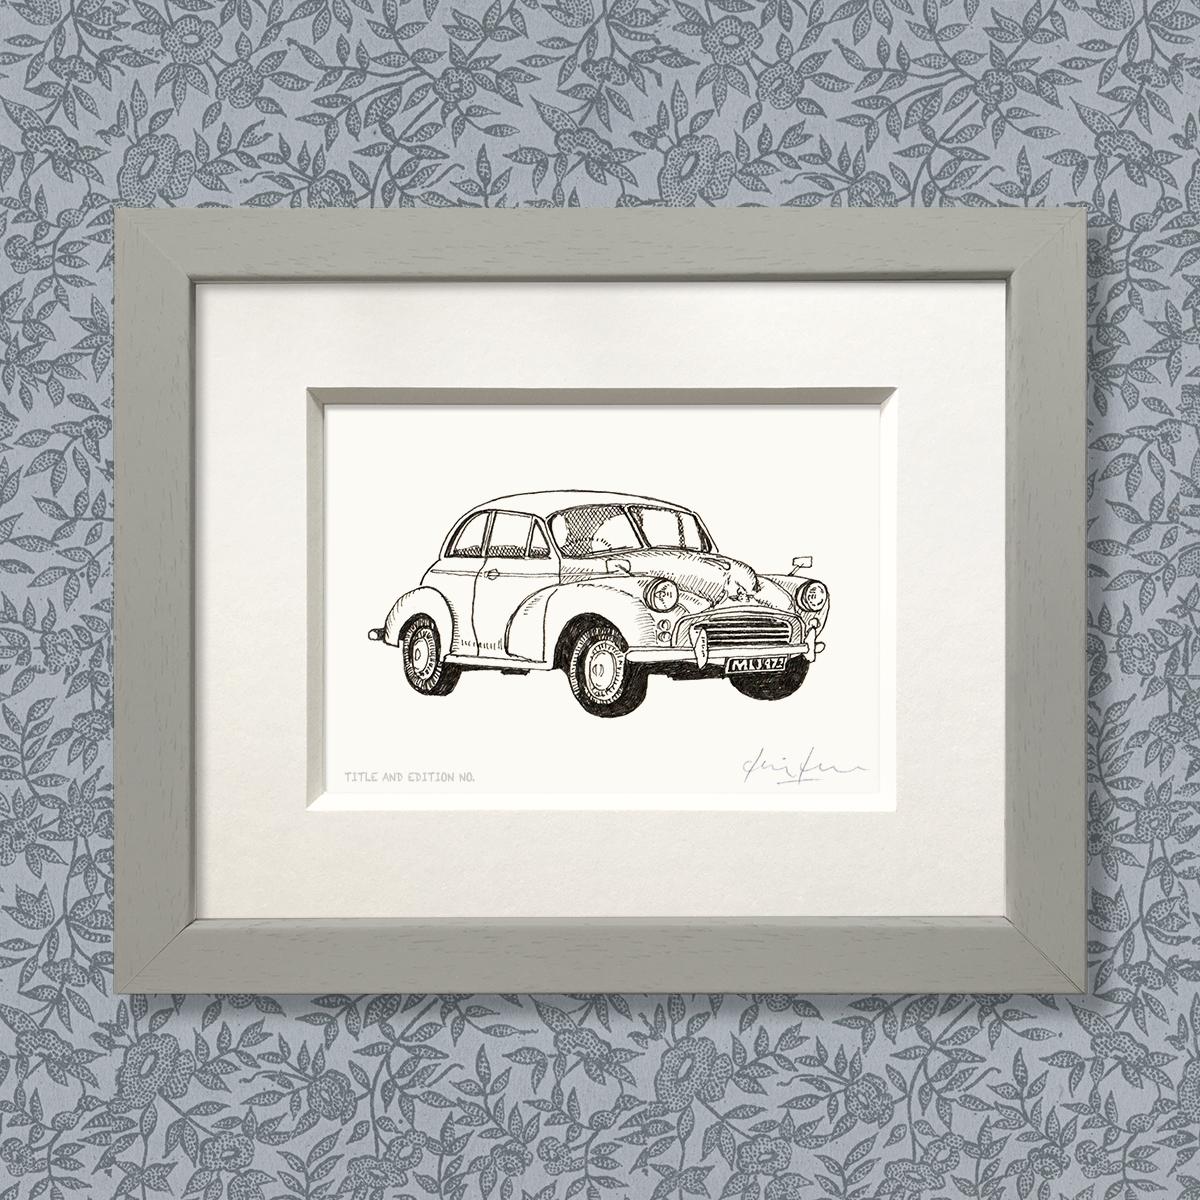 Limited edition print from pen and ink drawing of a Morris Minor in a grey frame